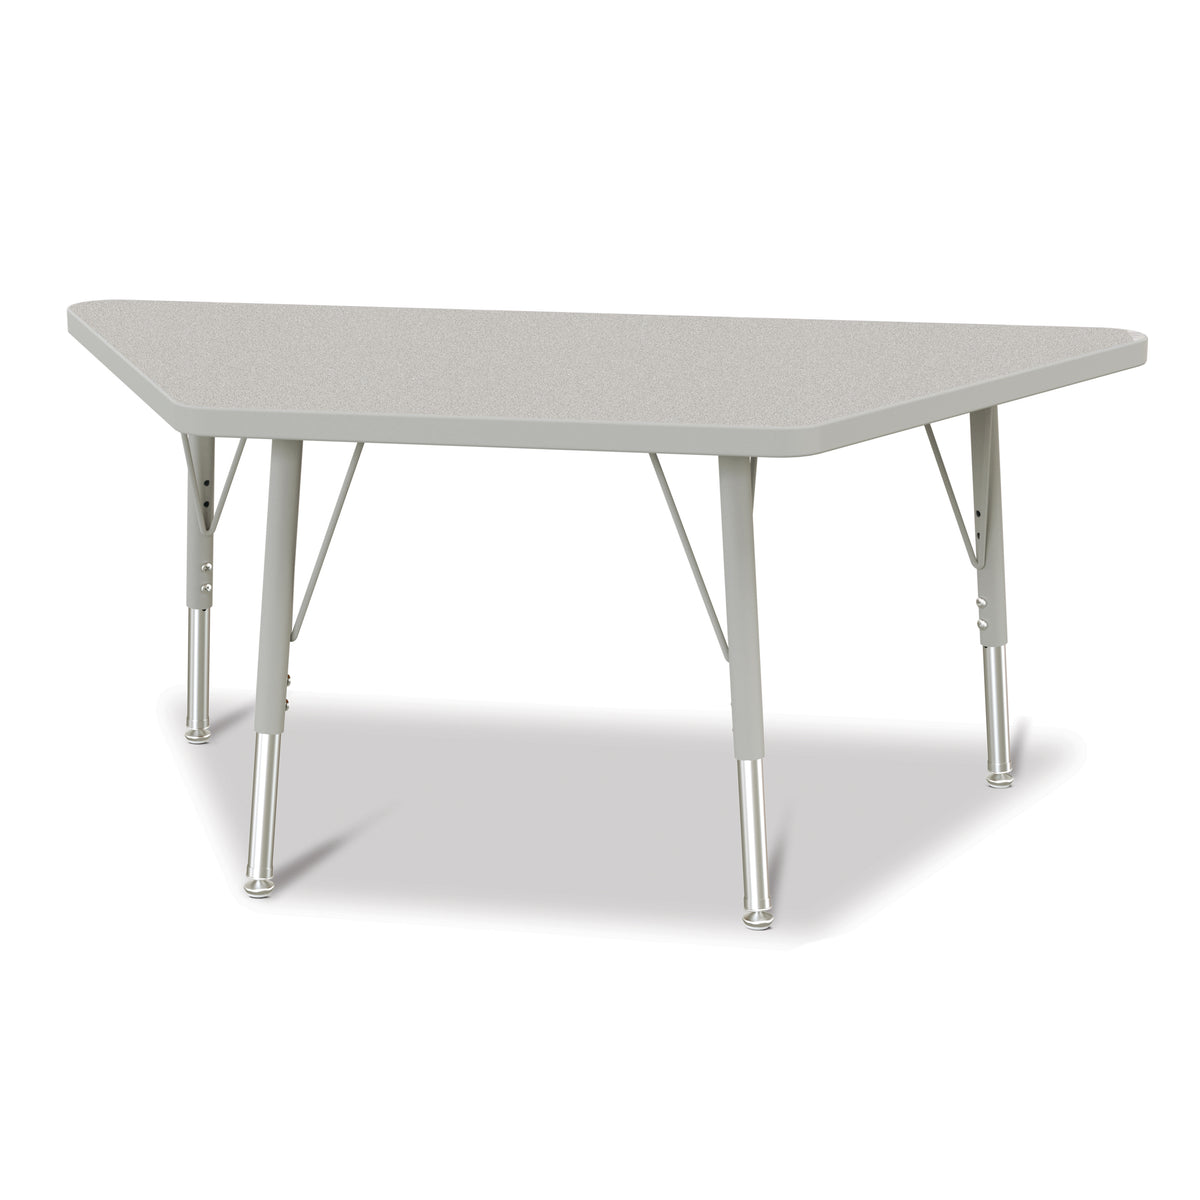 6438JCE000, Berries Trapezoid Activity Tables - 24" X 48", A-height - Freckled Gray/Gray/Gray